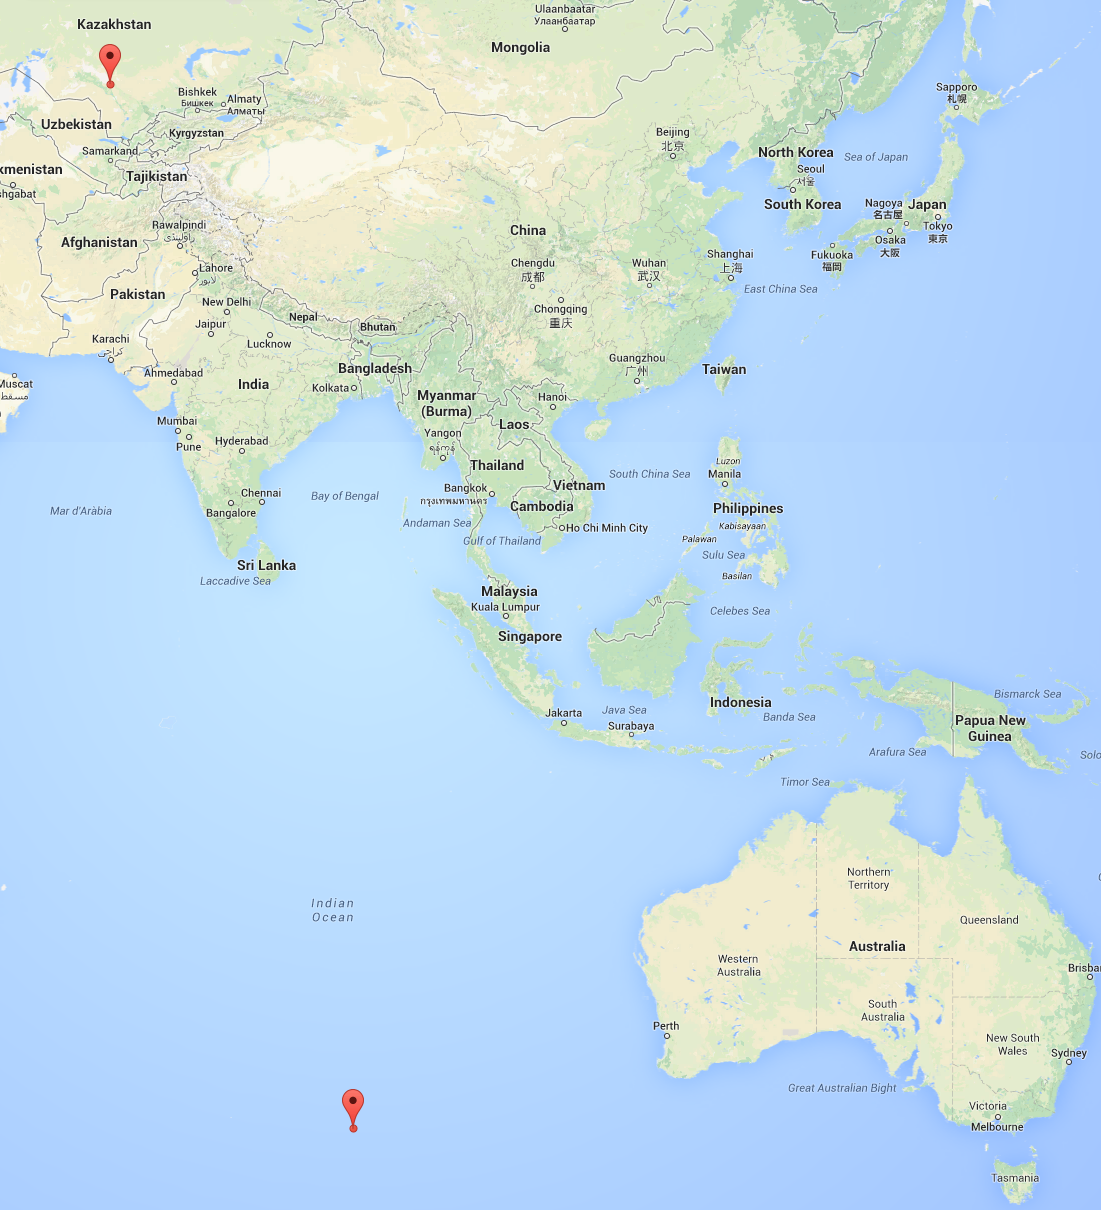 mh370-map-full.png